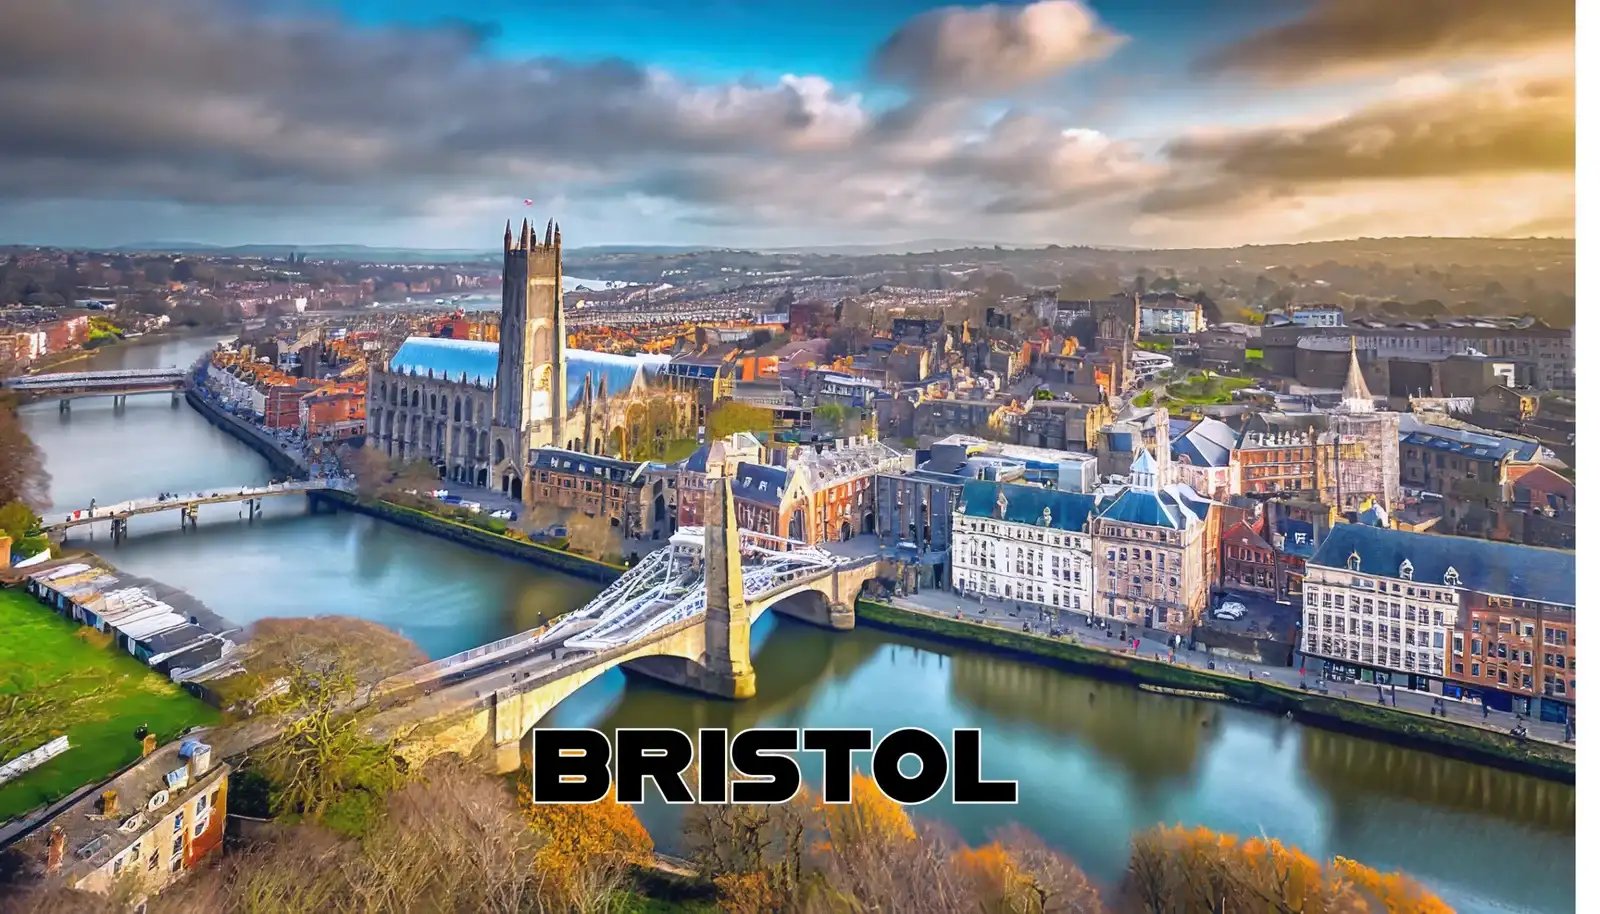 Aerial view of Bristol cityscape with historic buildings and a bridge over the river.